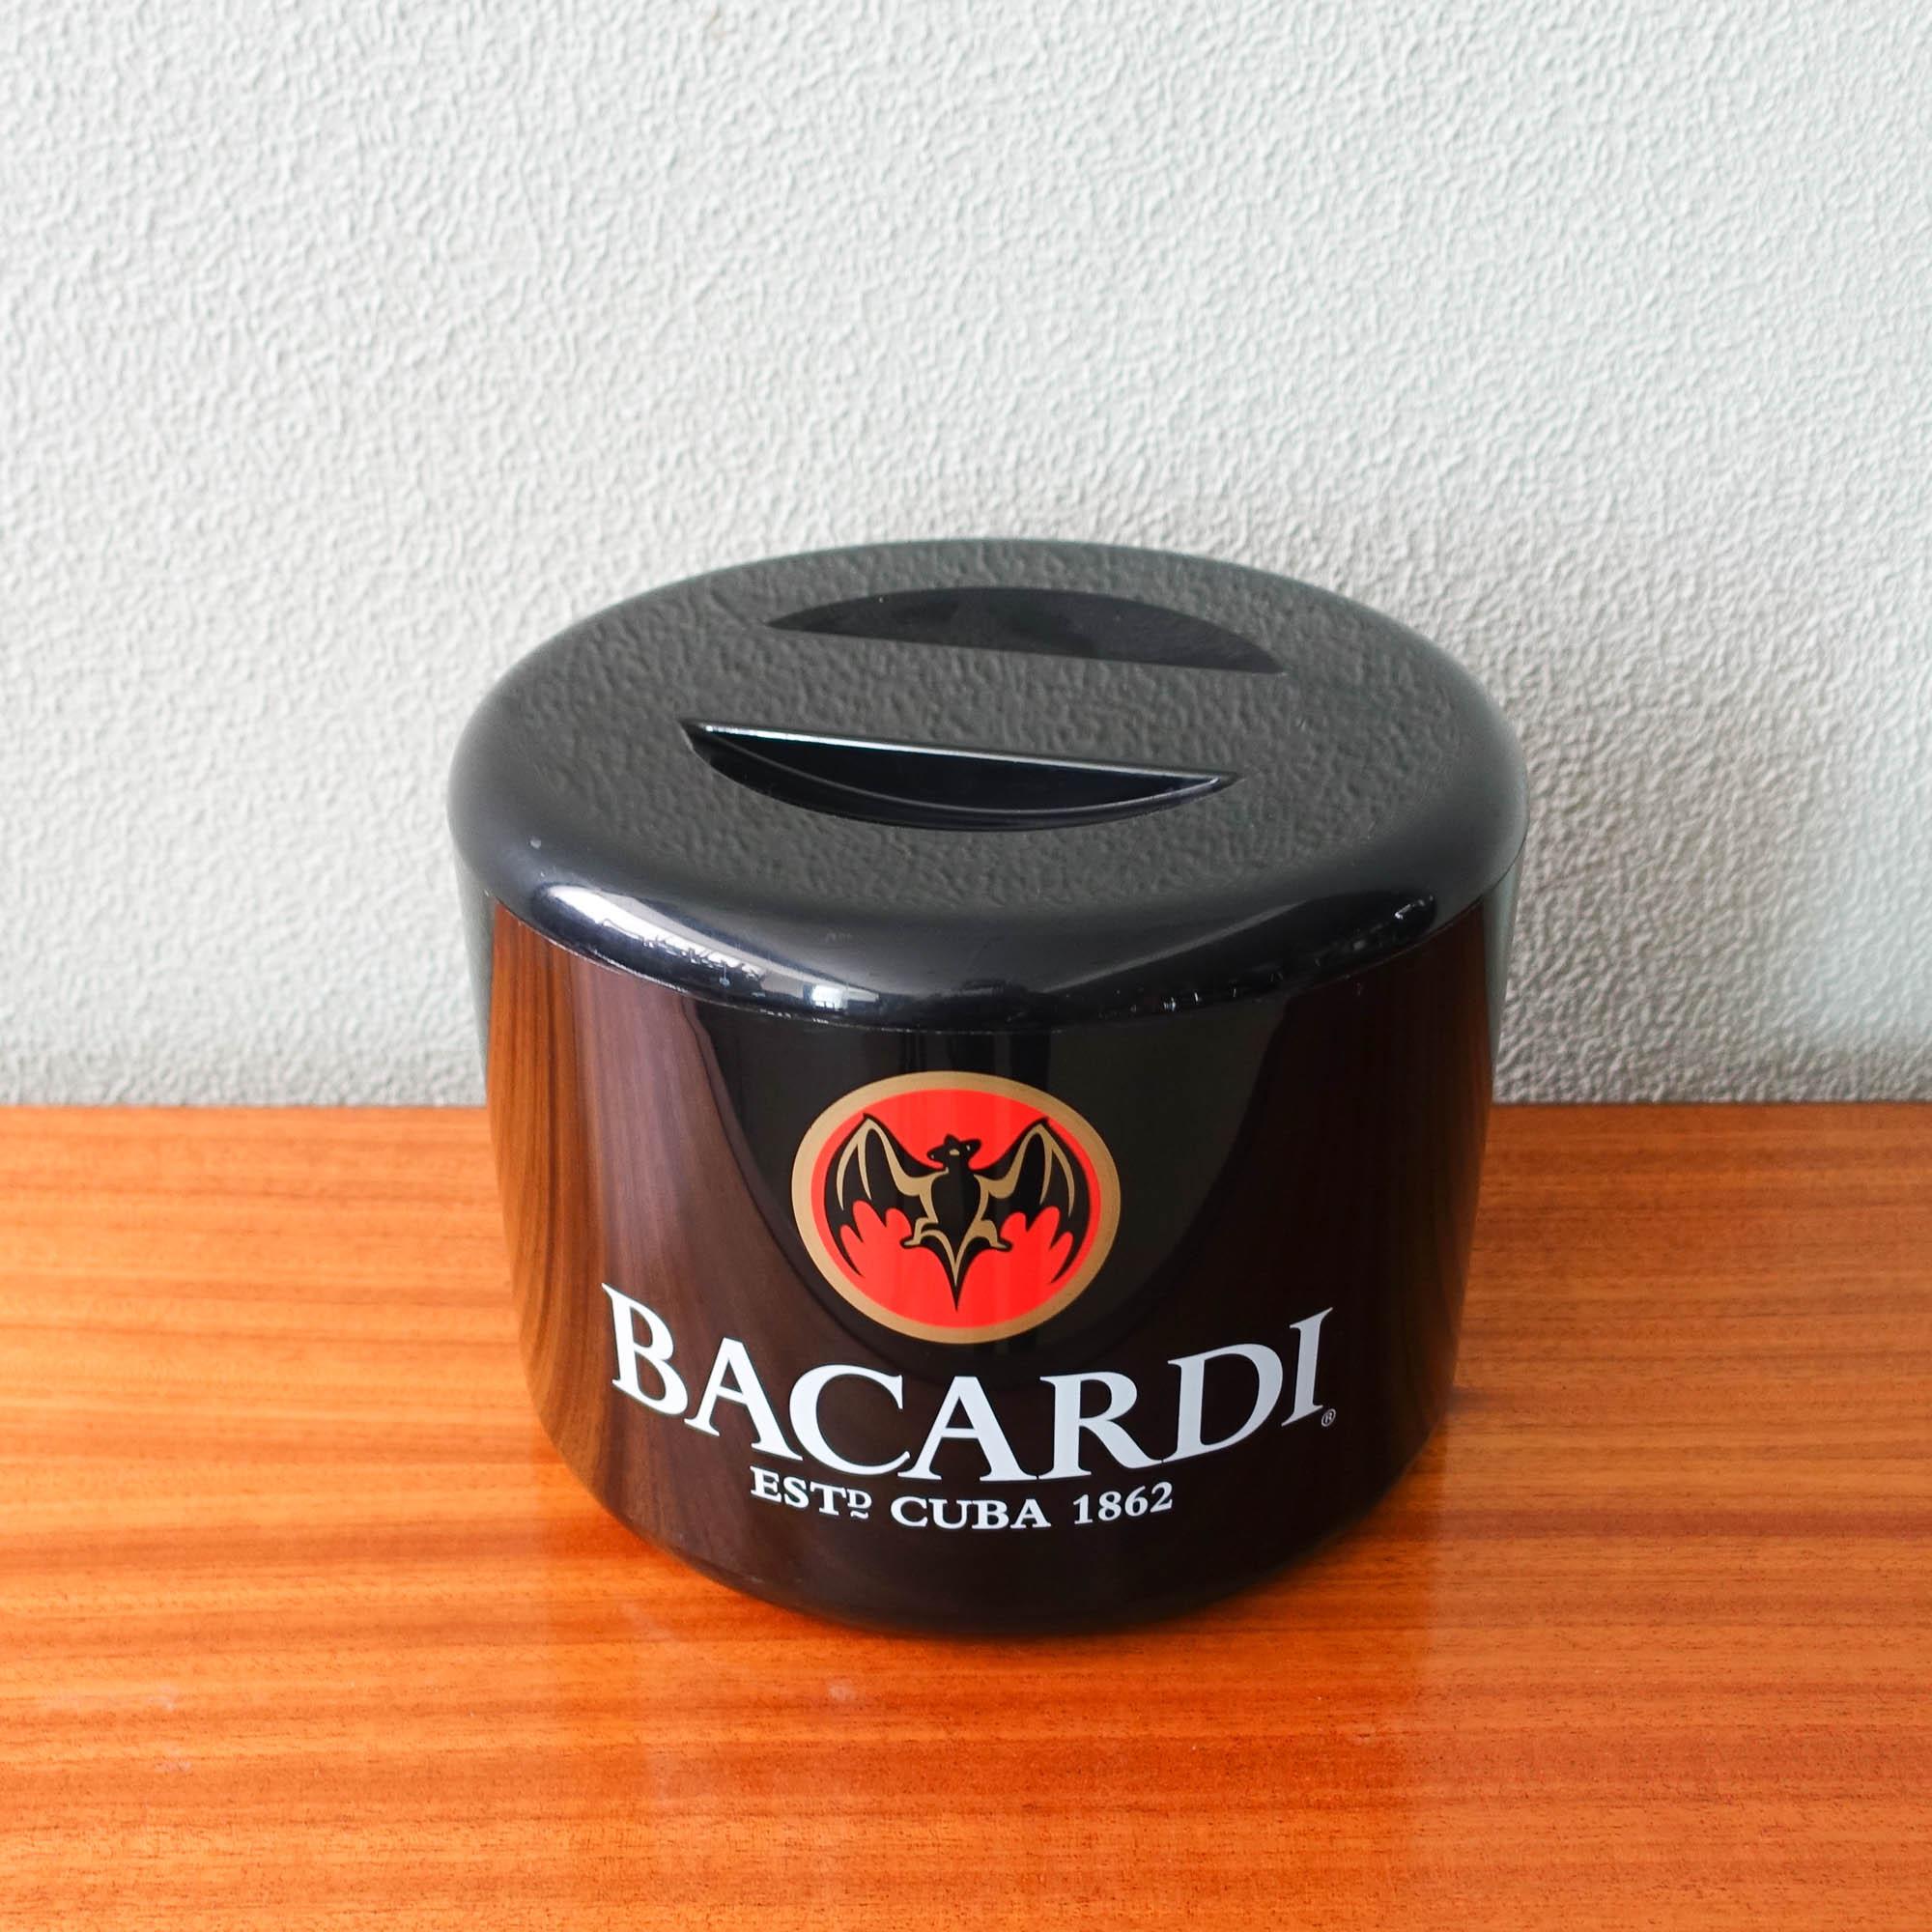 This ice bucket was produced by Diamond Photofoil Ltd, in Kent, United Kingdom, during the 1990's. It was a brand activation piece used in bars and discos to promote Bacardi. 
The ice bucket has a lid to close and maintain the temperature of the